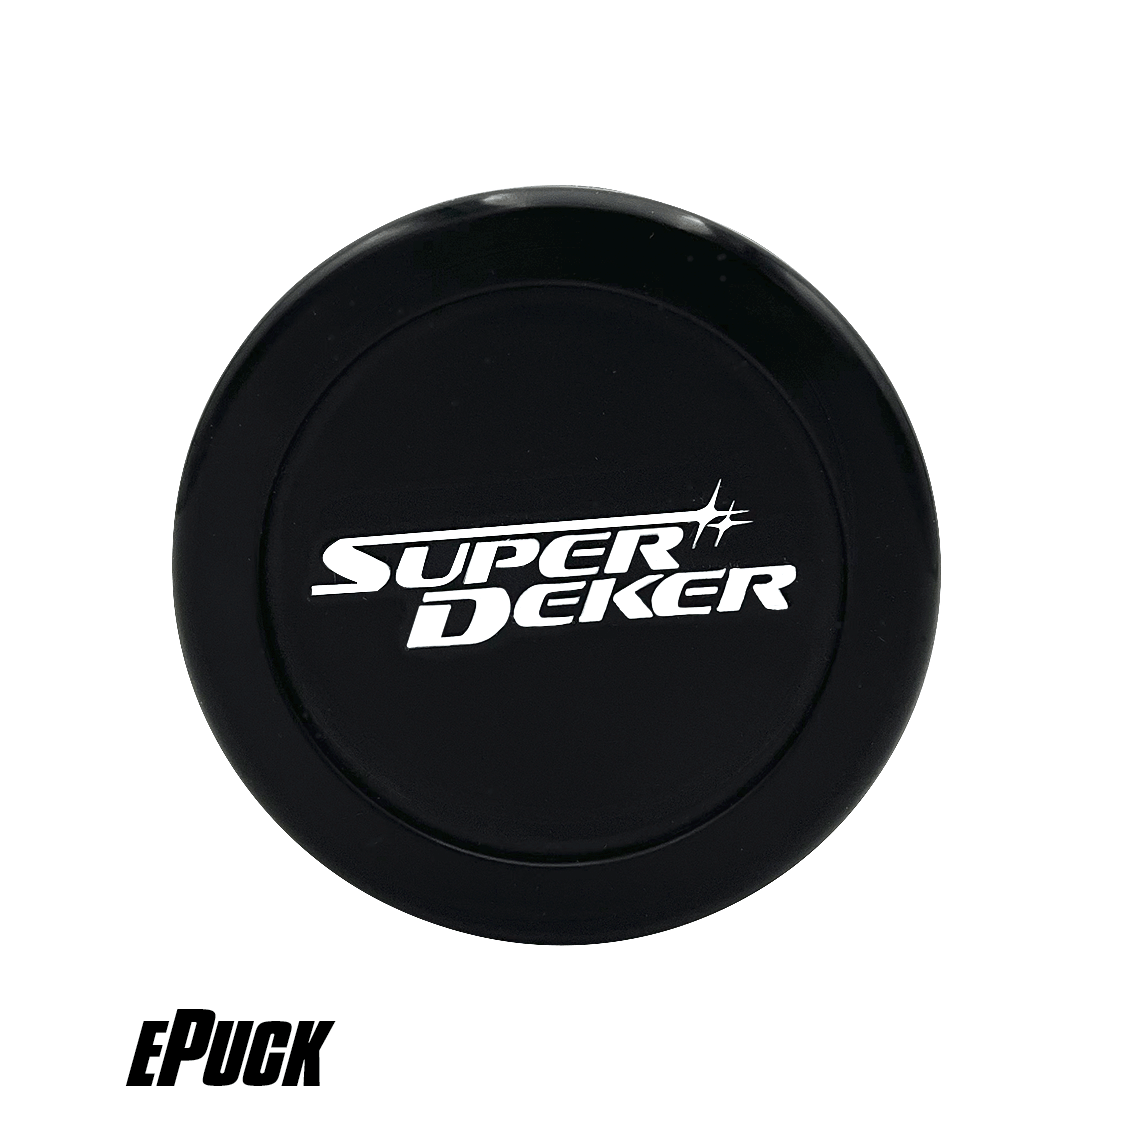 The regulation weight ePuck for SuperDeker is the ideal puck for stickhandling trainers that help with hockey training and skills.